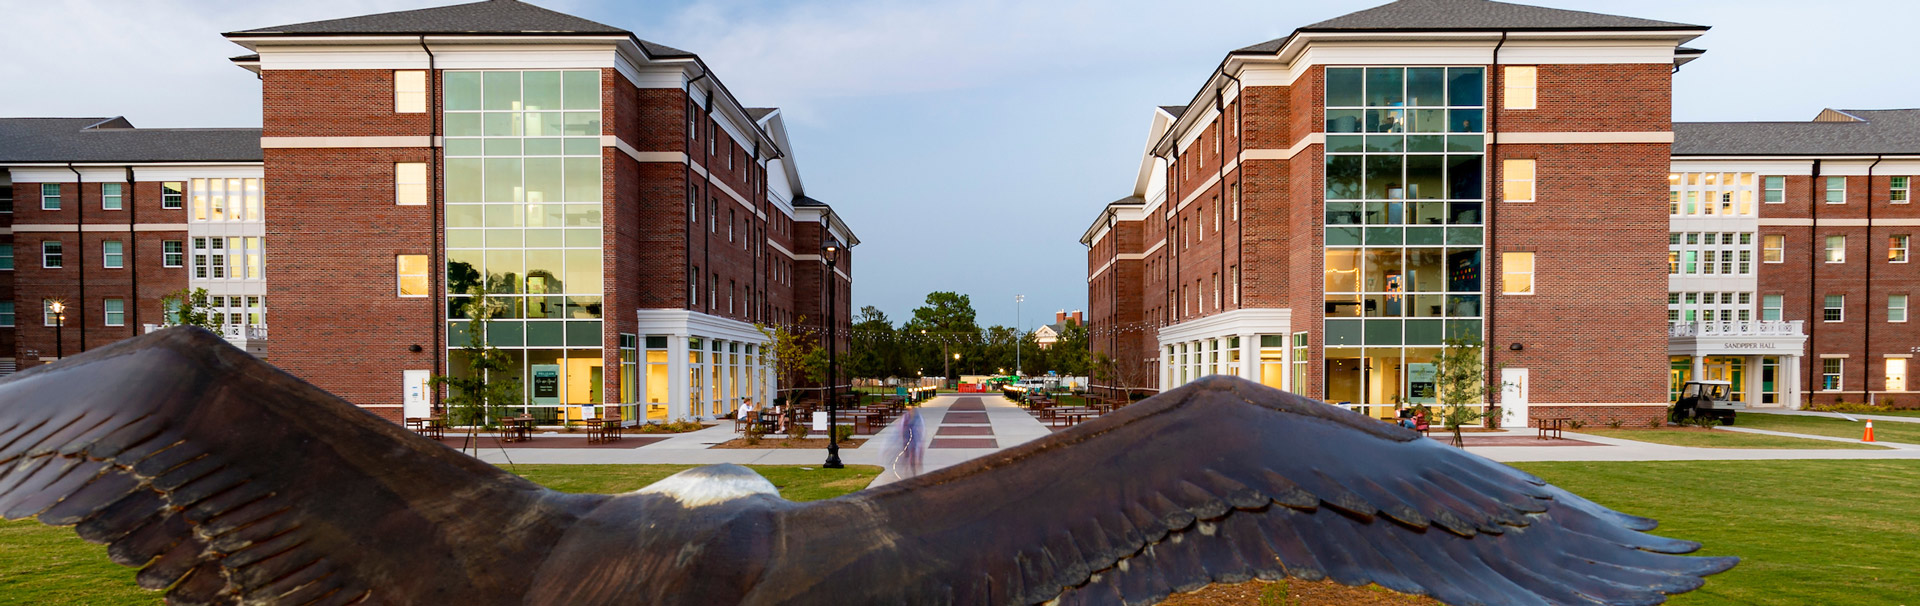 Seahawk statue overlooking the residence halls